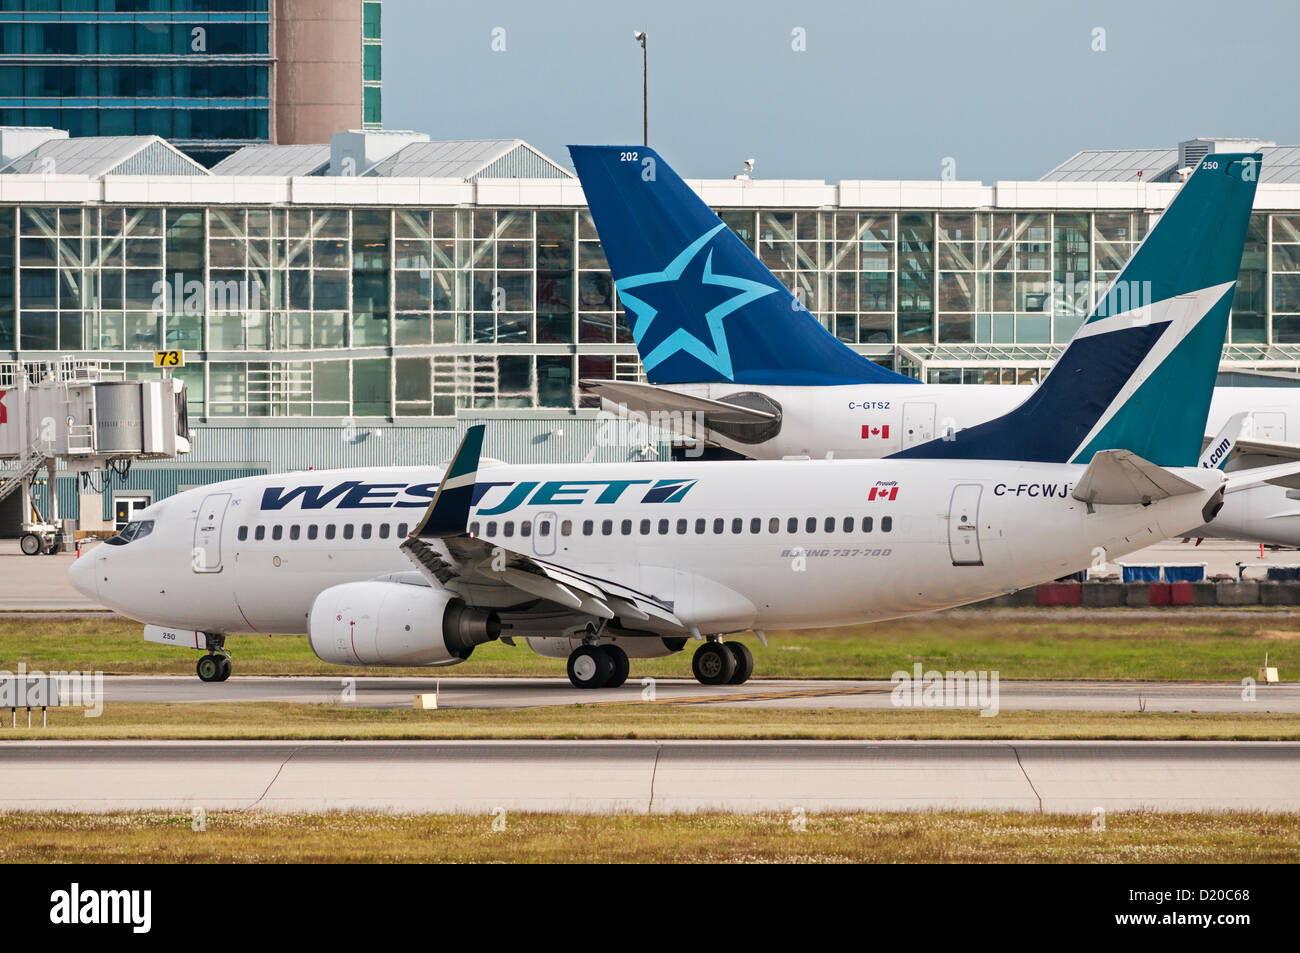 A Westjet Boeing 737 jetliner taxies by an Air Transat Airbus A330 jetliner on the tarmac at Vancouver International Airport Stock Photo